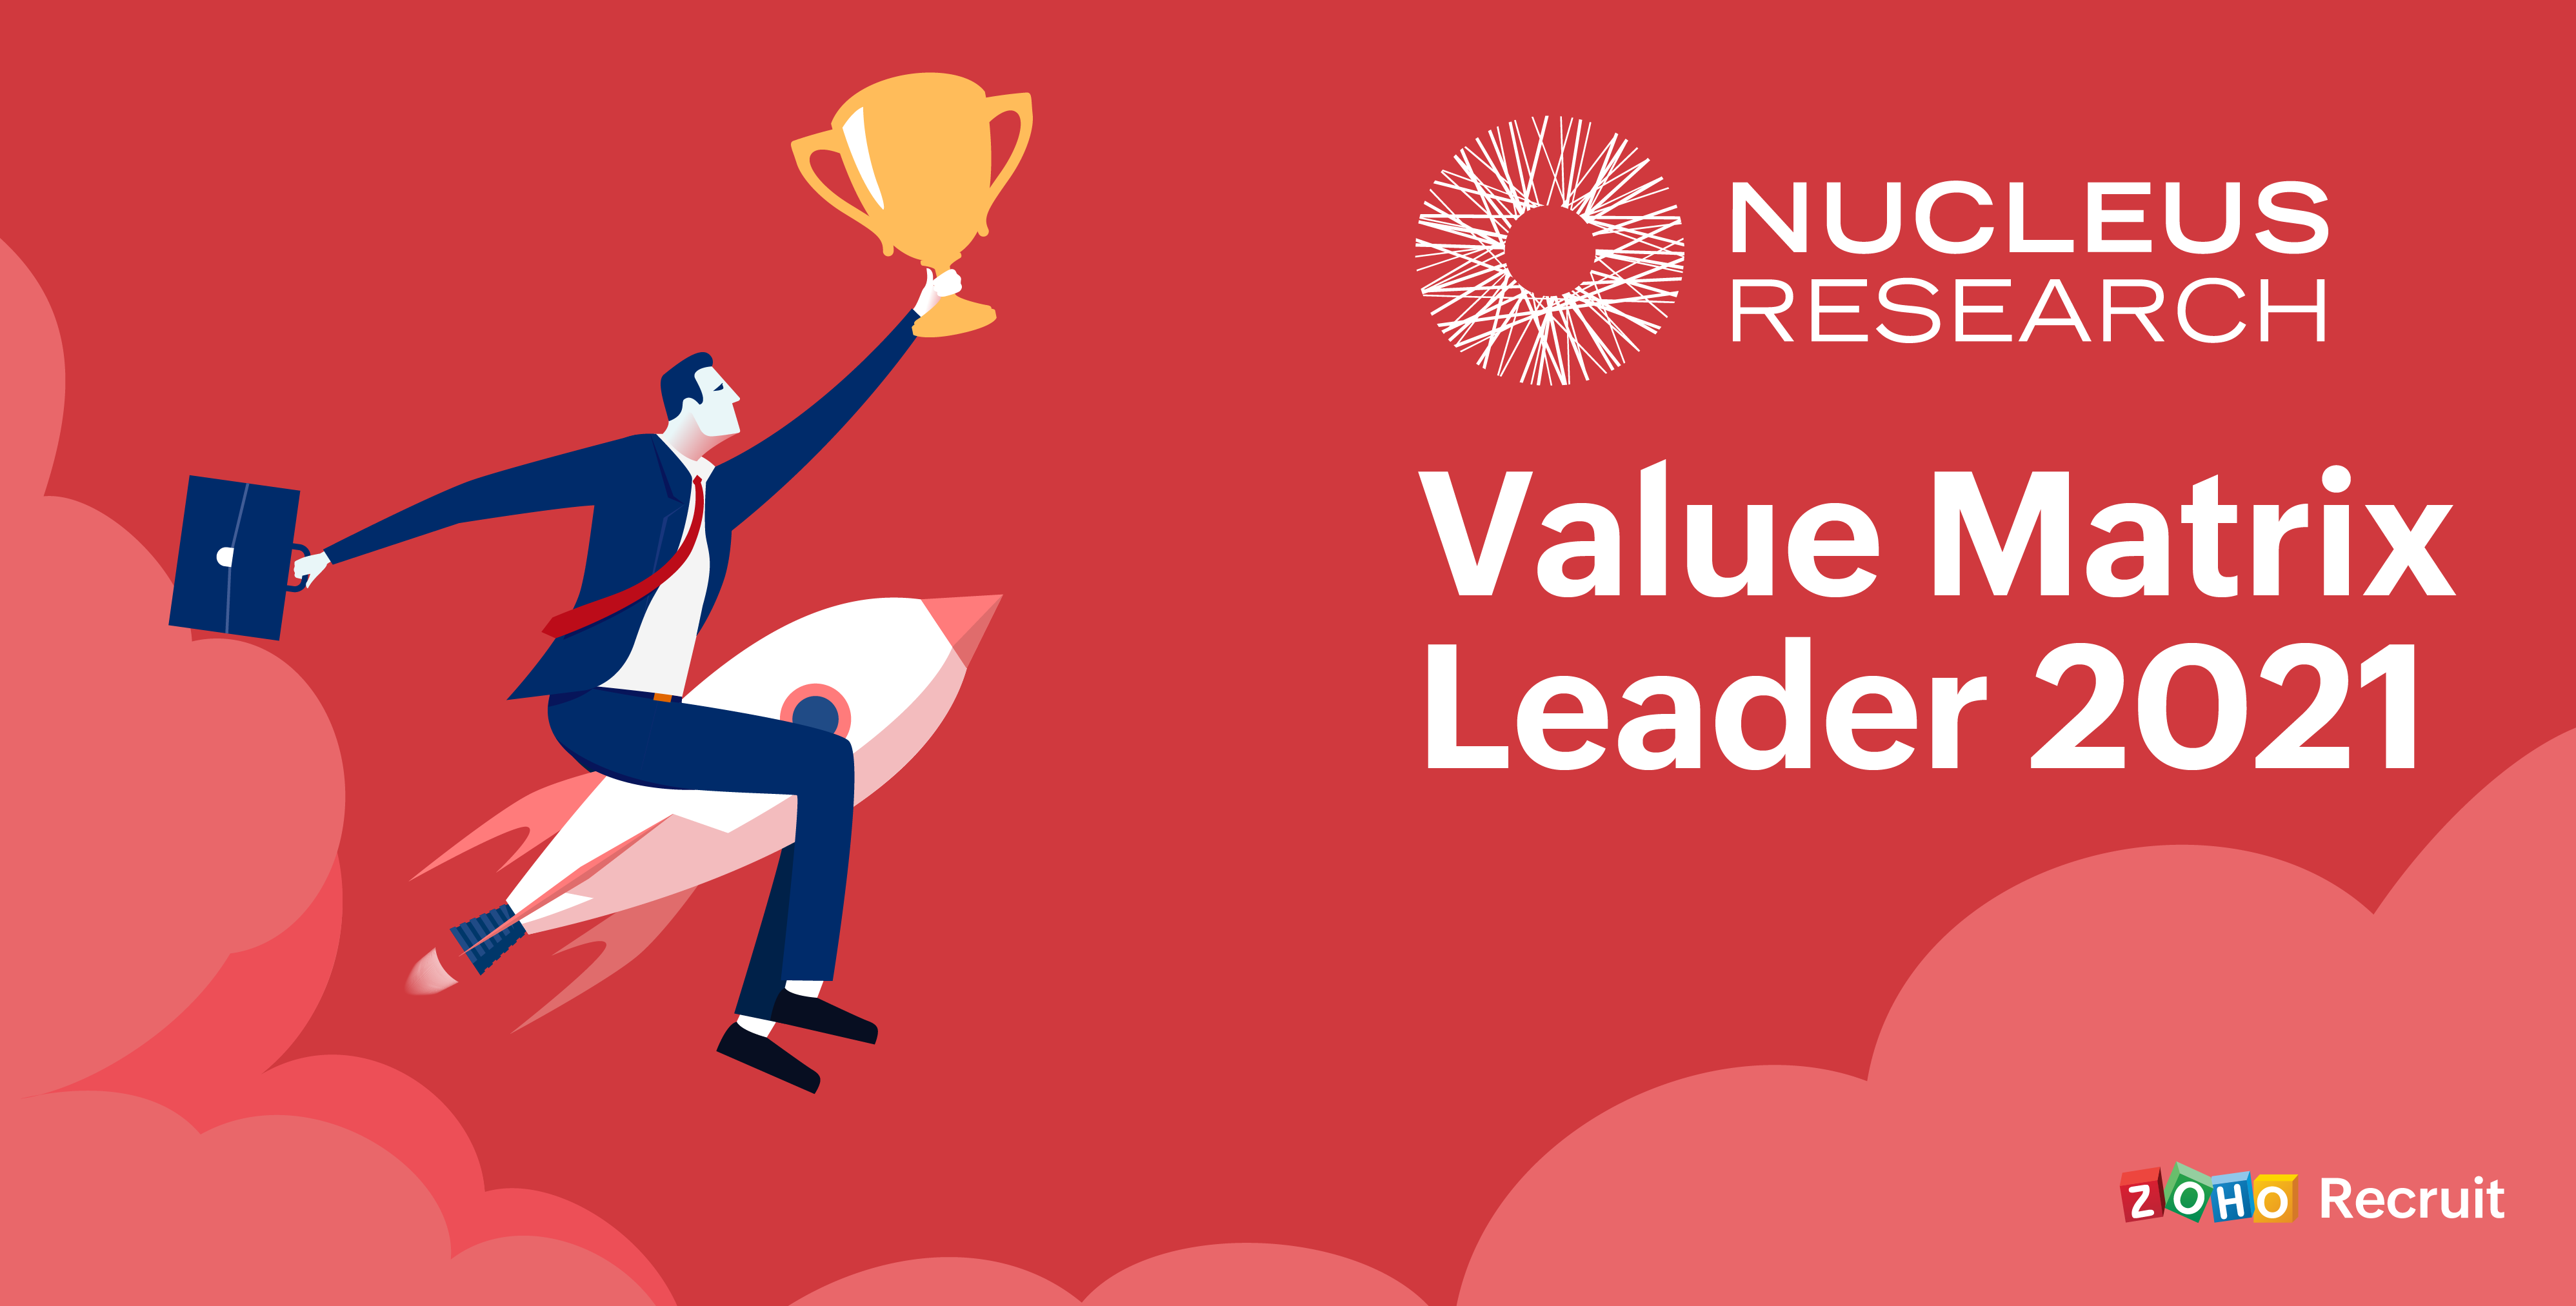 Zoho Recruit named a “Leader” in Nucleus Research’s Talent Acquisition Technology Value Matrix, 2021